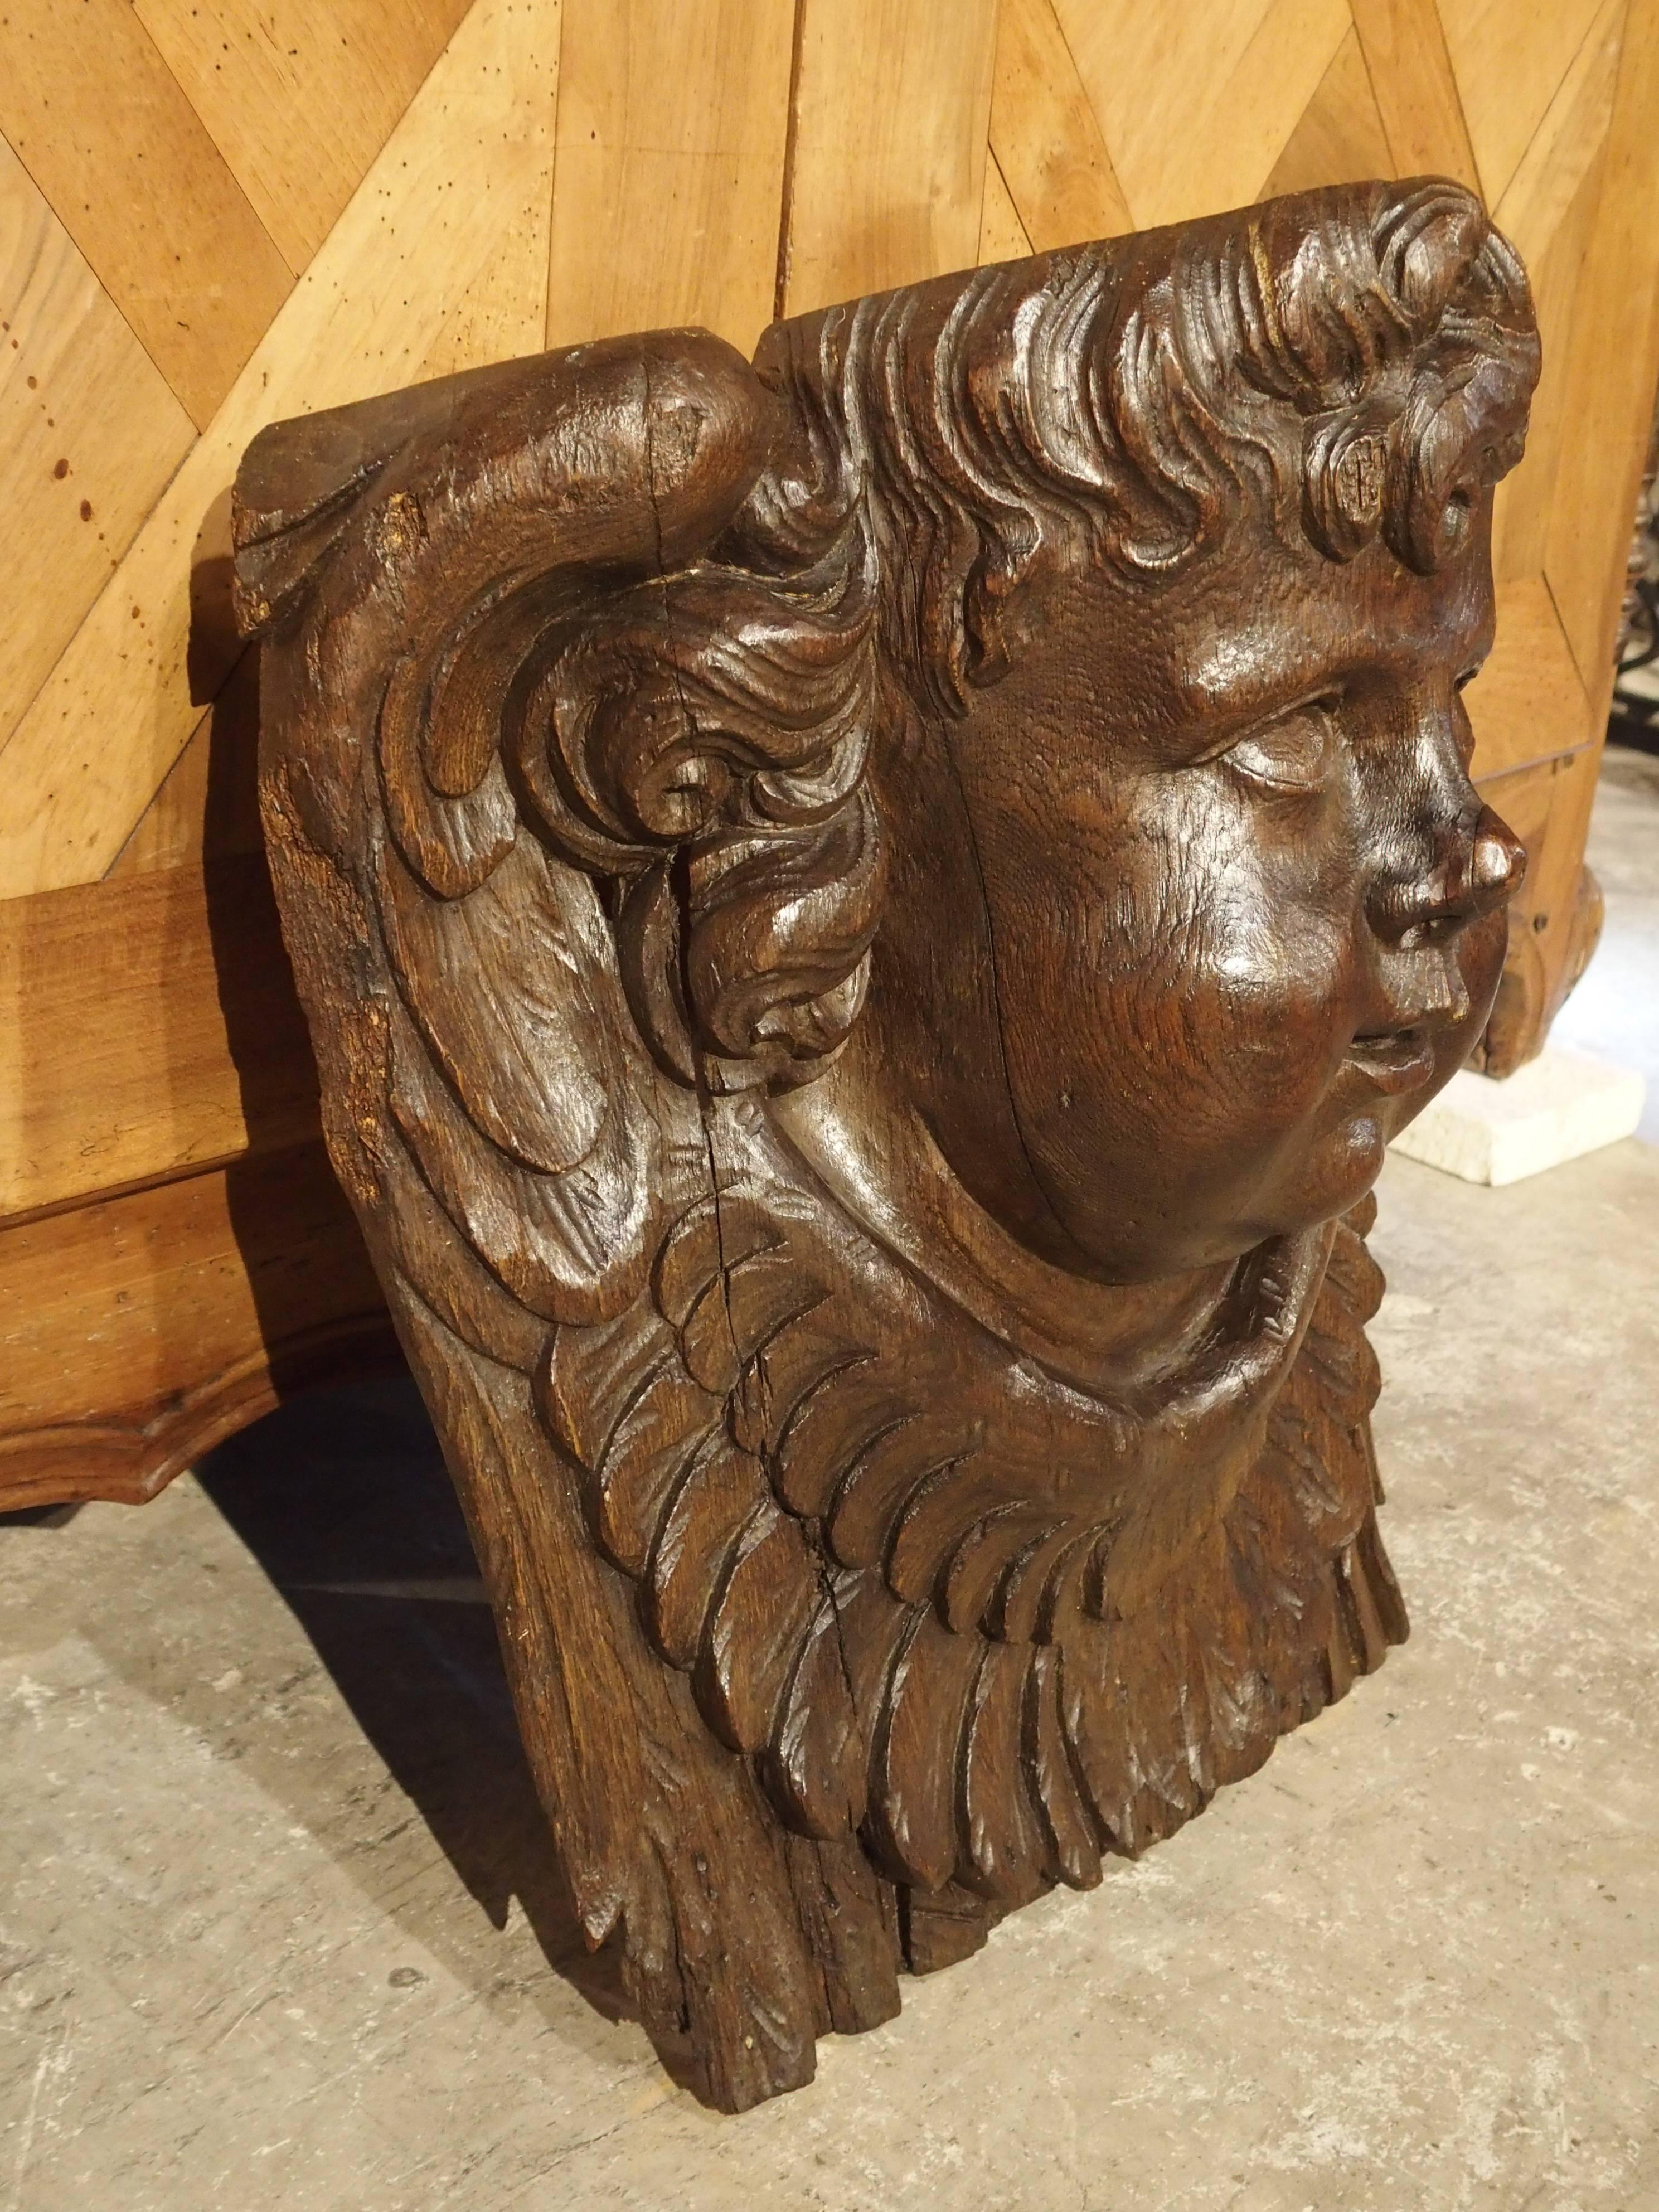 This large detailed hand carving of a stylized cherub’s face features feathered wings surrounding the side and base of the carving. It was cut and carved from a single piece of oak. Incised feathers on the cherub’s wings are still visible and